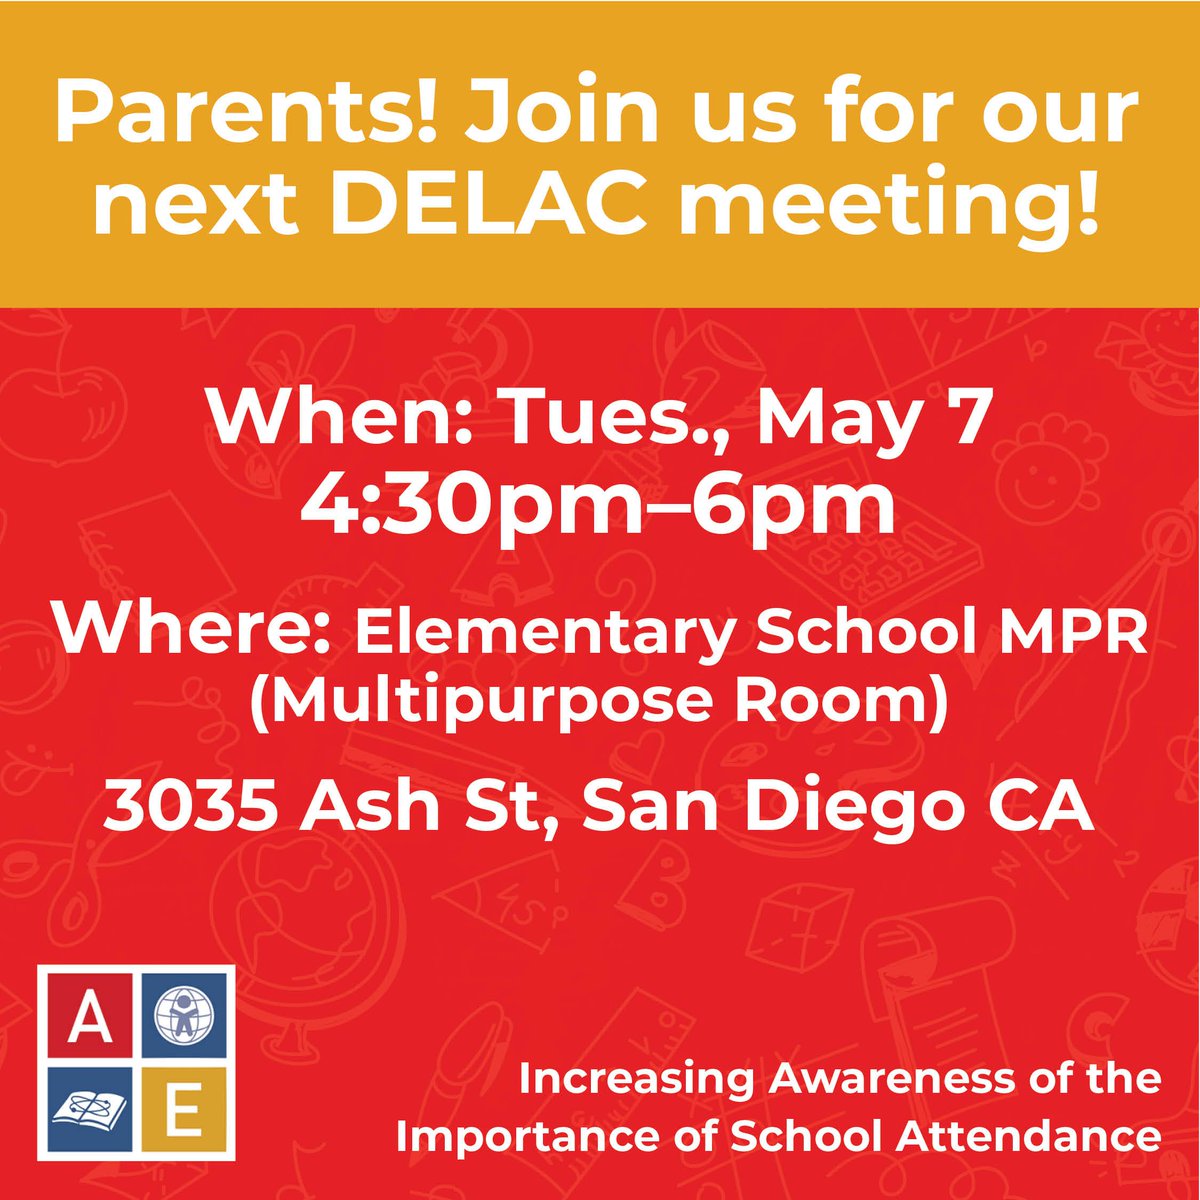 📣 Join us for the DELAC meeting on May 7th and be part of the conversation shaping your child's education.

Your involvement and input are invaluable to us! RSVP now: aeacs.org/delac

#DELACMeeting #ParentInvolvement #AlbertEinsteinAcademY